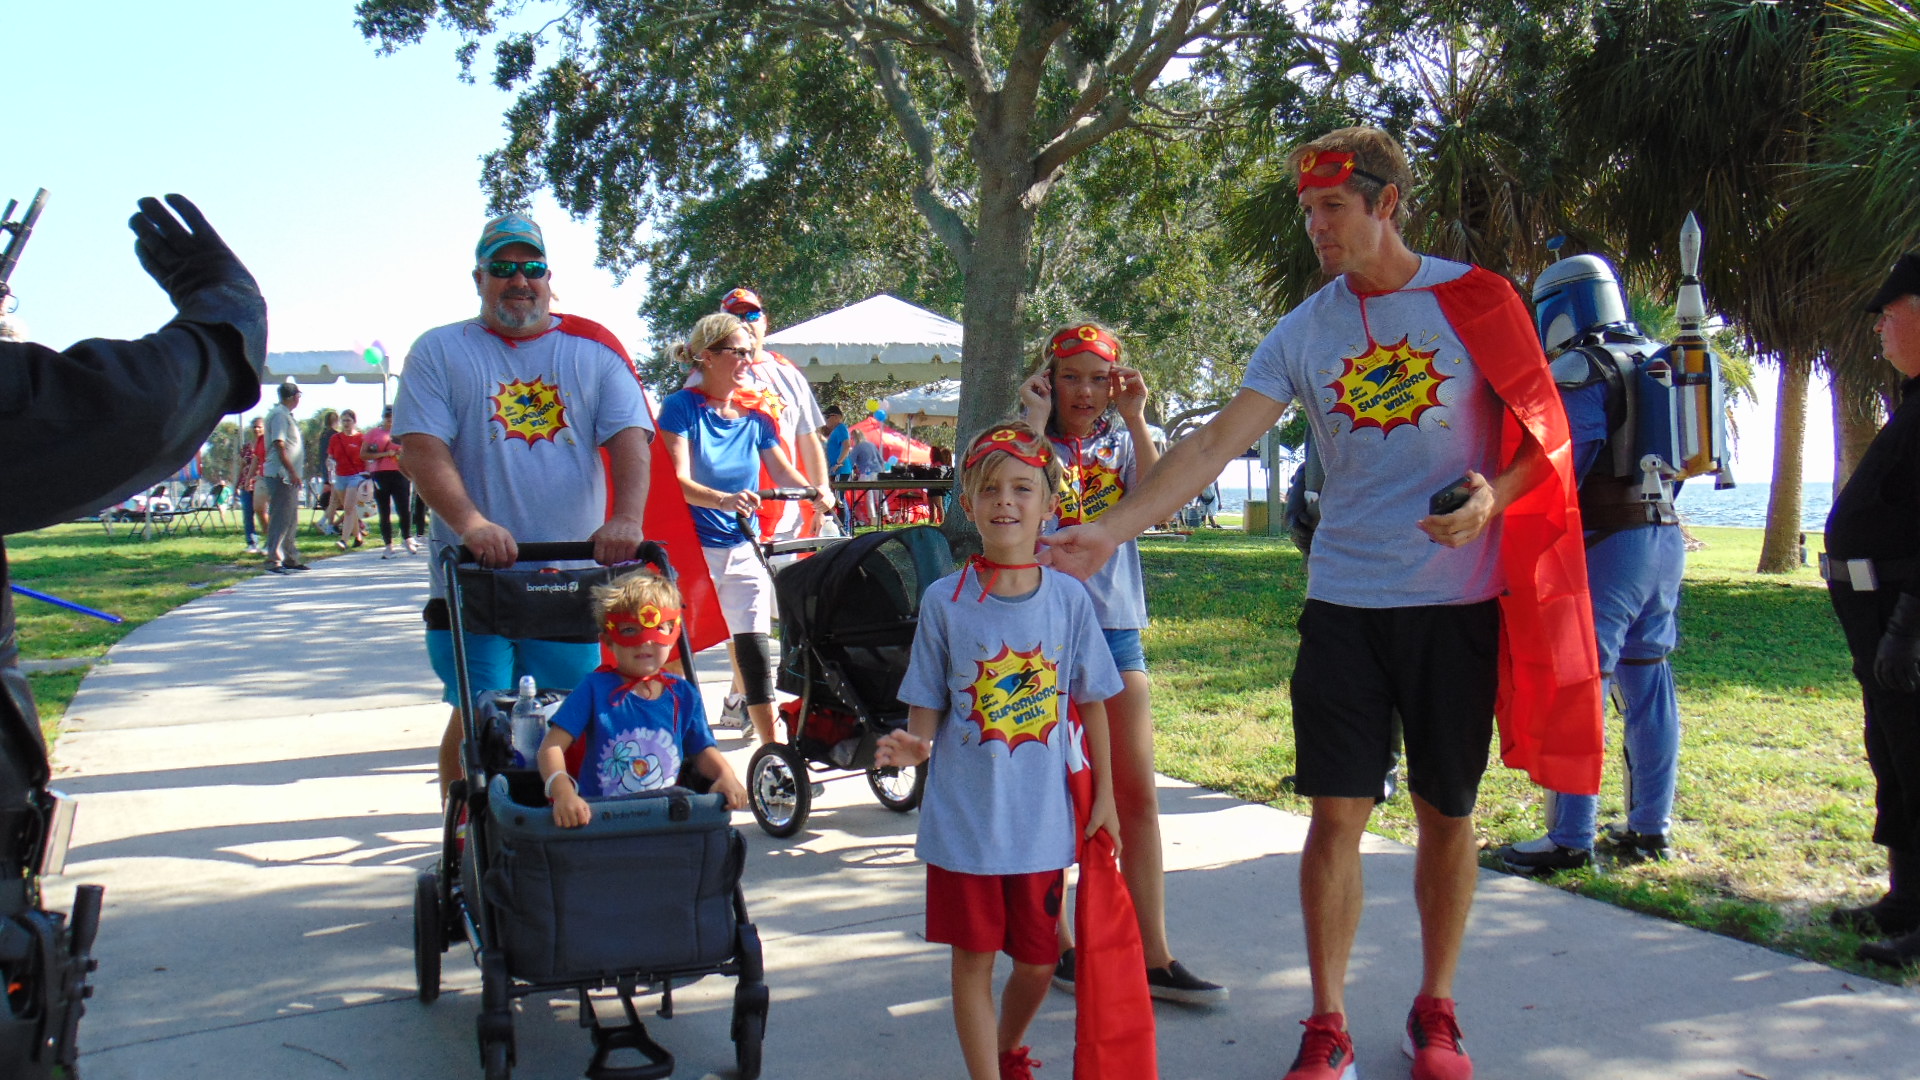 CHECK OUT THE WALKS & RUN/WALKS THAT ARE HAPPENING IN YOUR AREA AND JOIN THE FUN TODAY!